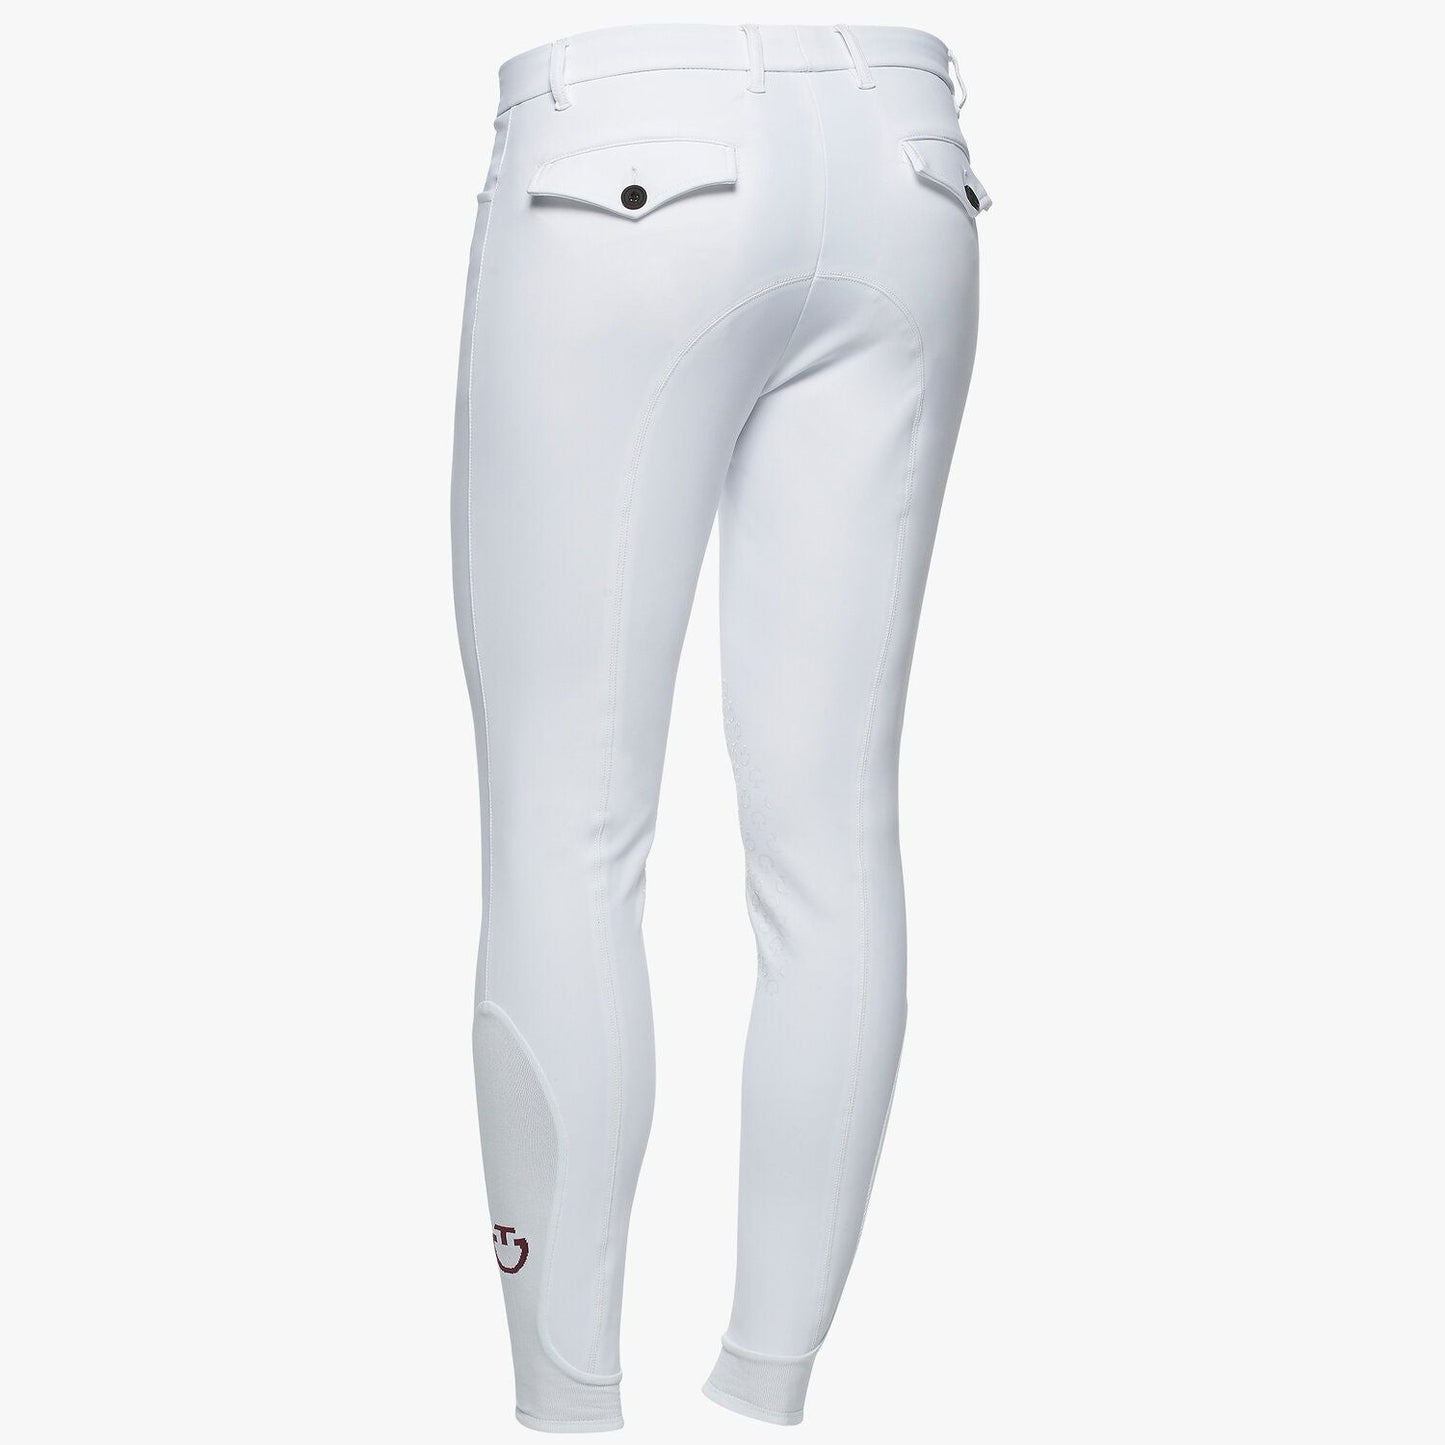 Cavalleria Toscana Men's New Grip System Breeches - White-Trailrace Equestrian Outfitters-The Equestrian